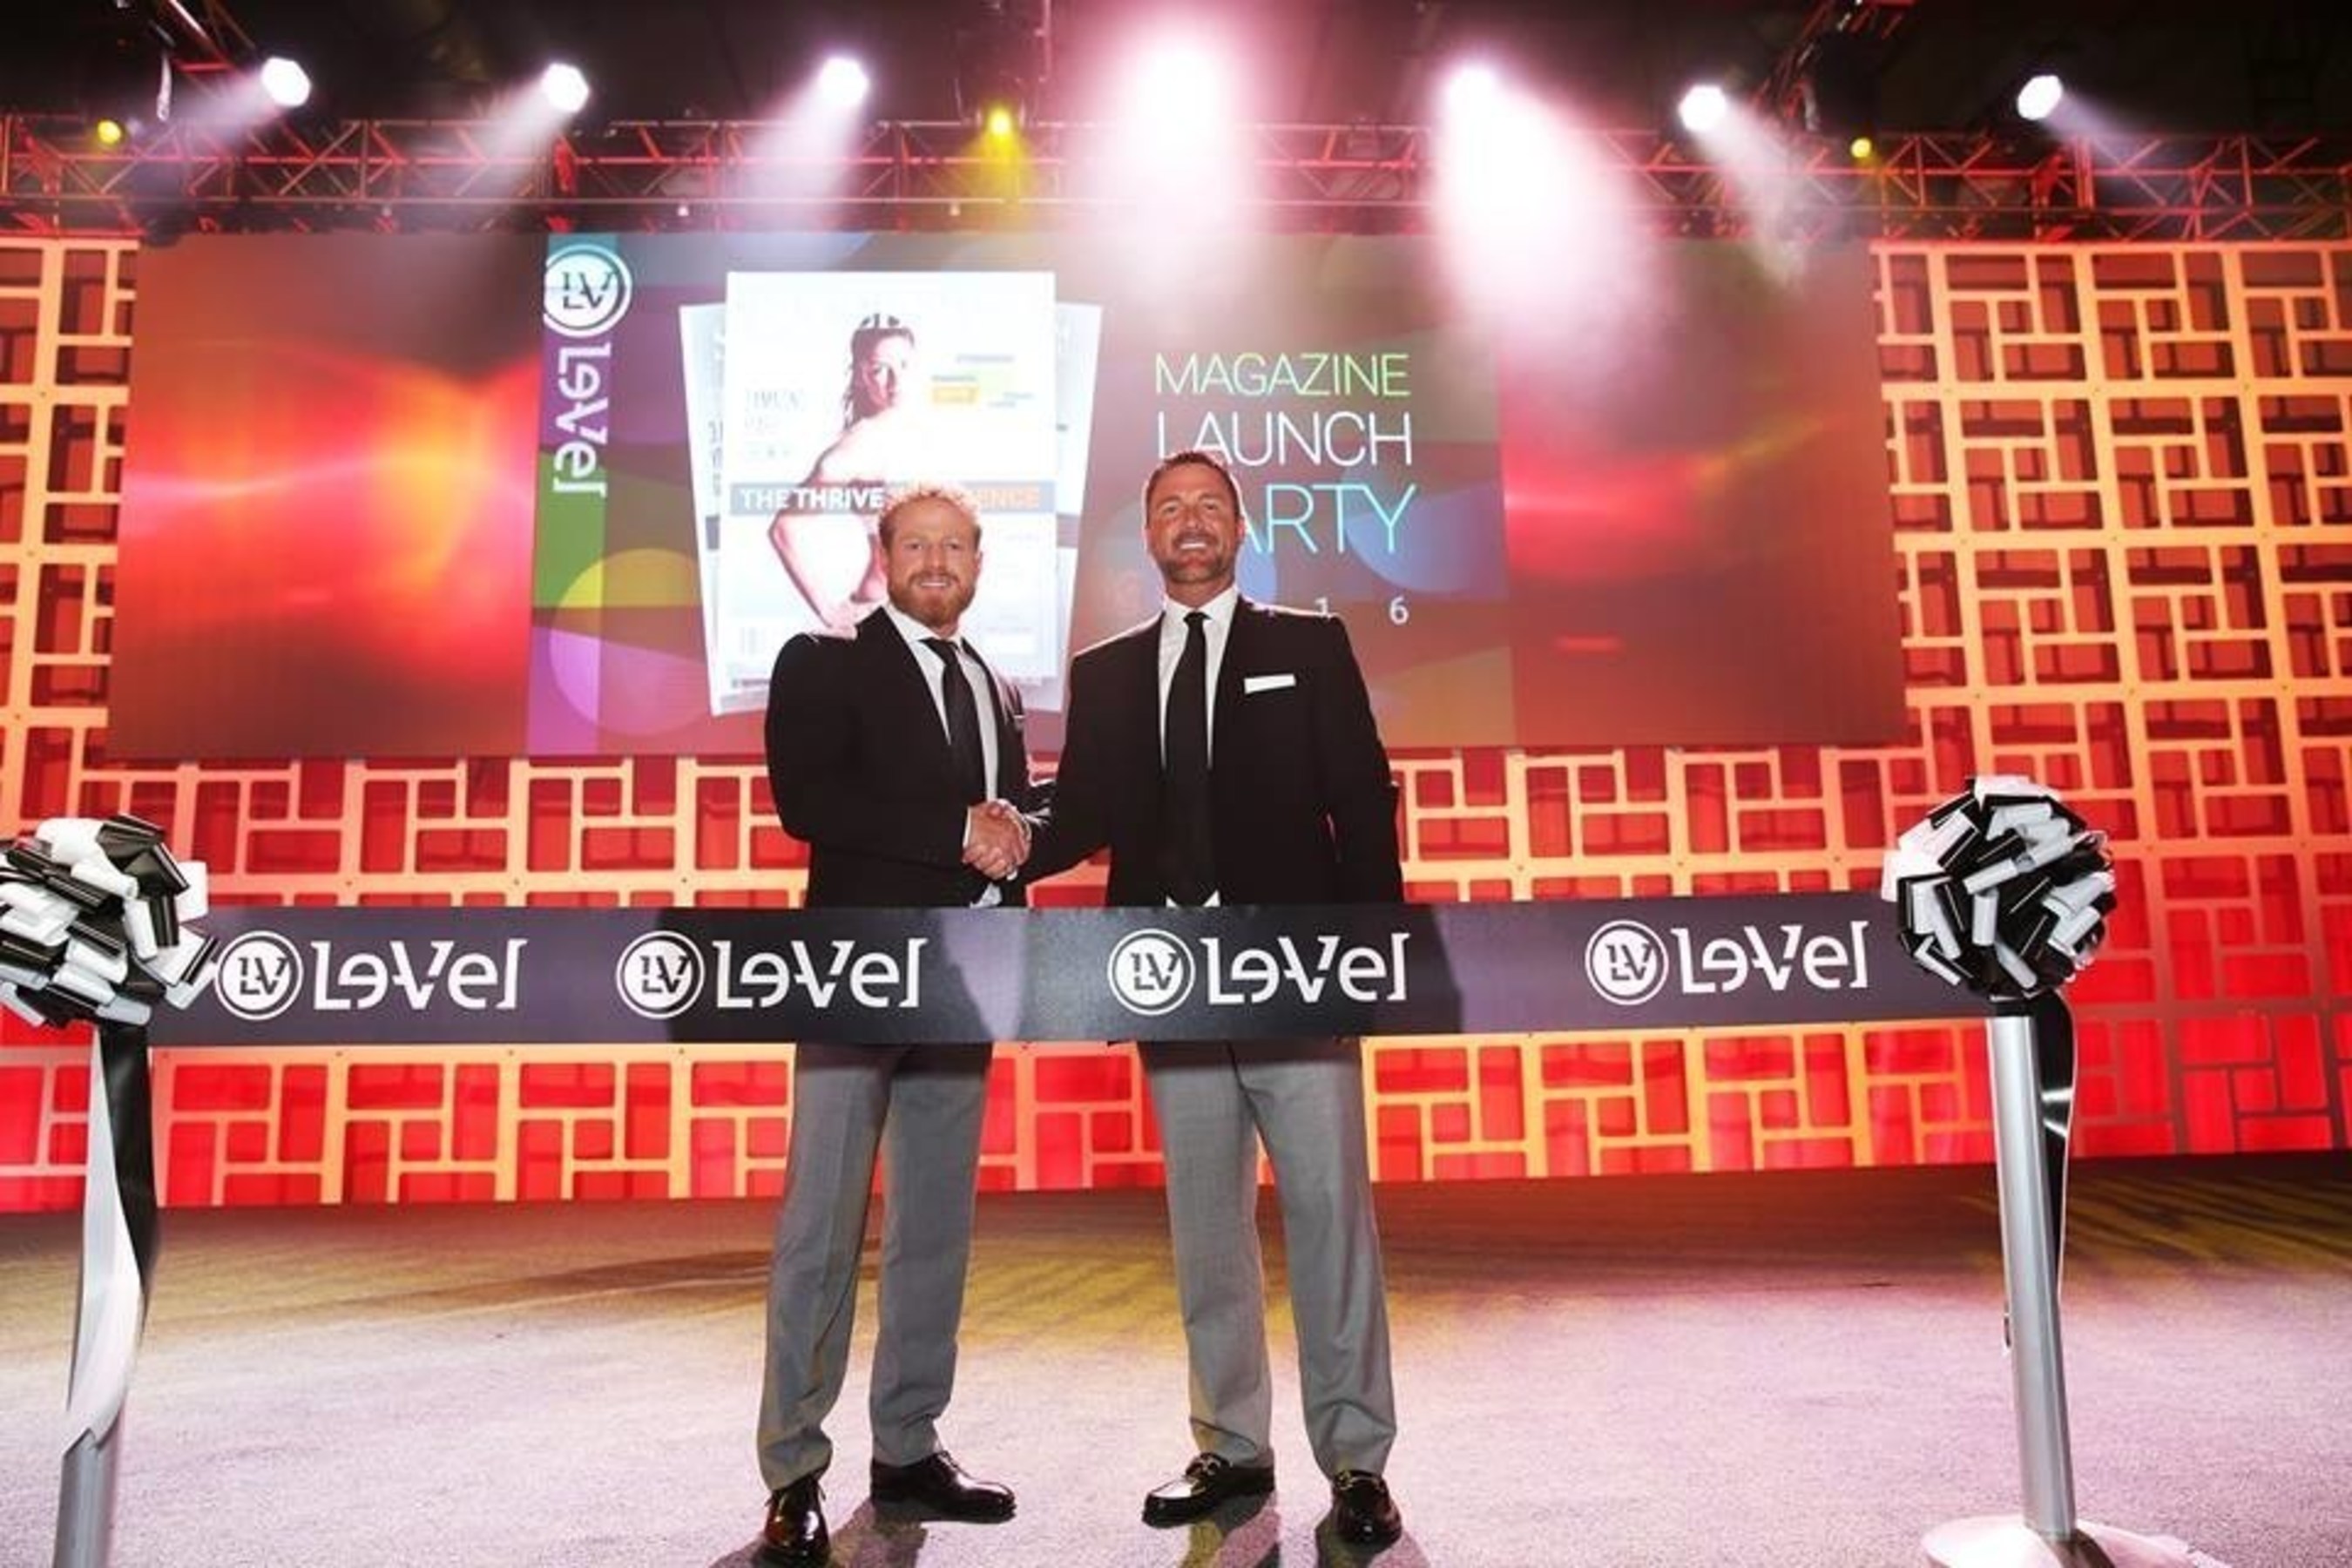 Le-Vel Co-Founders, Co-CEOs and Co-Owners Jason Camper and Paul Gravette take the stage at Le-Vel's SUCCESS FROM HOME magazine launch event held April 29 and 30 at the Gaylord Texan.